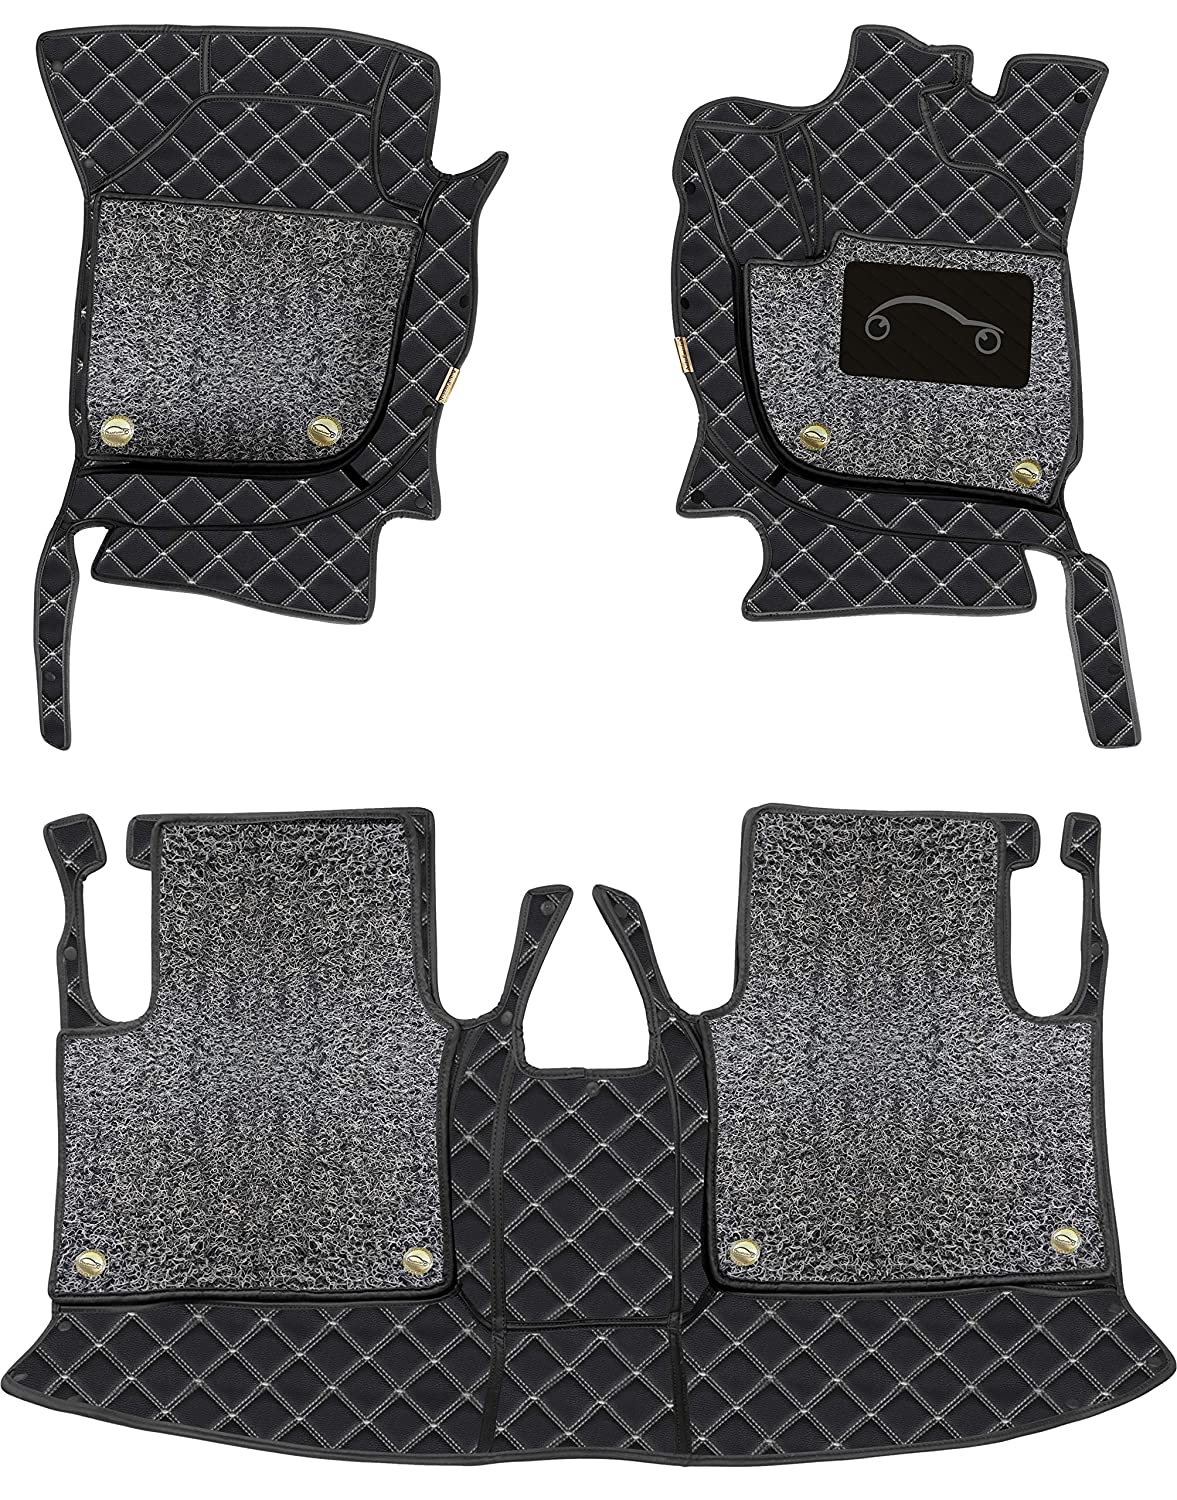 Mercedes GLC 43 AMG 2021 7D Luxury Car Mat, All Weather Proof, Anti-Skid, 100% Waterproof & Odorless with Unique Diamond Fish Design (24mm Luxury PU Leather, 2 Rows)